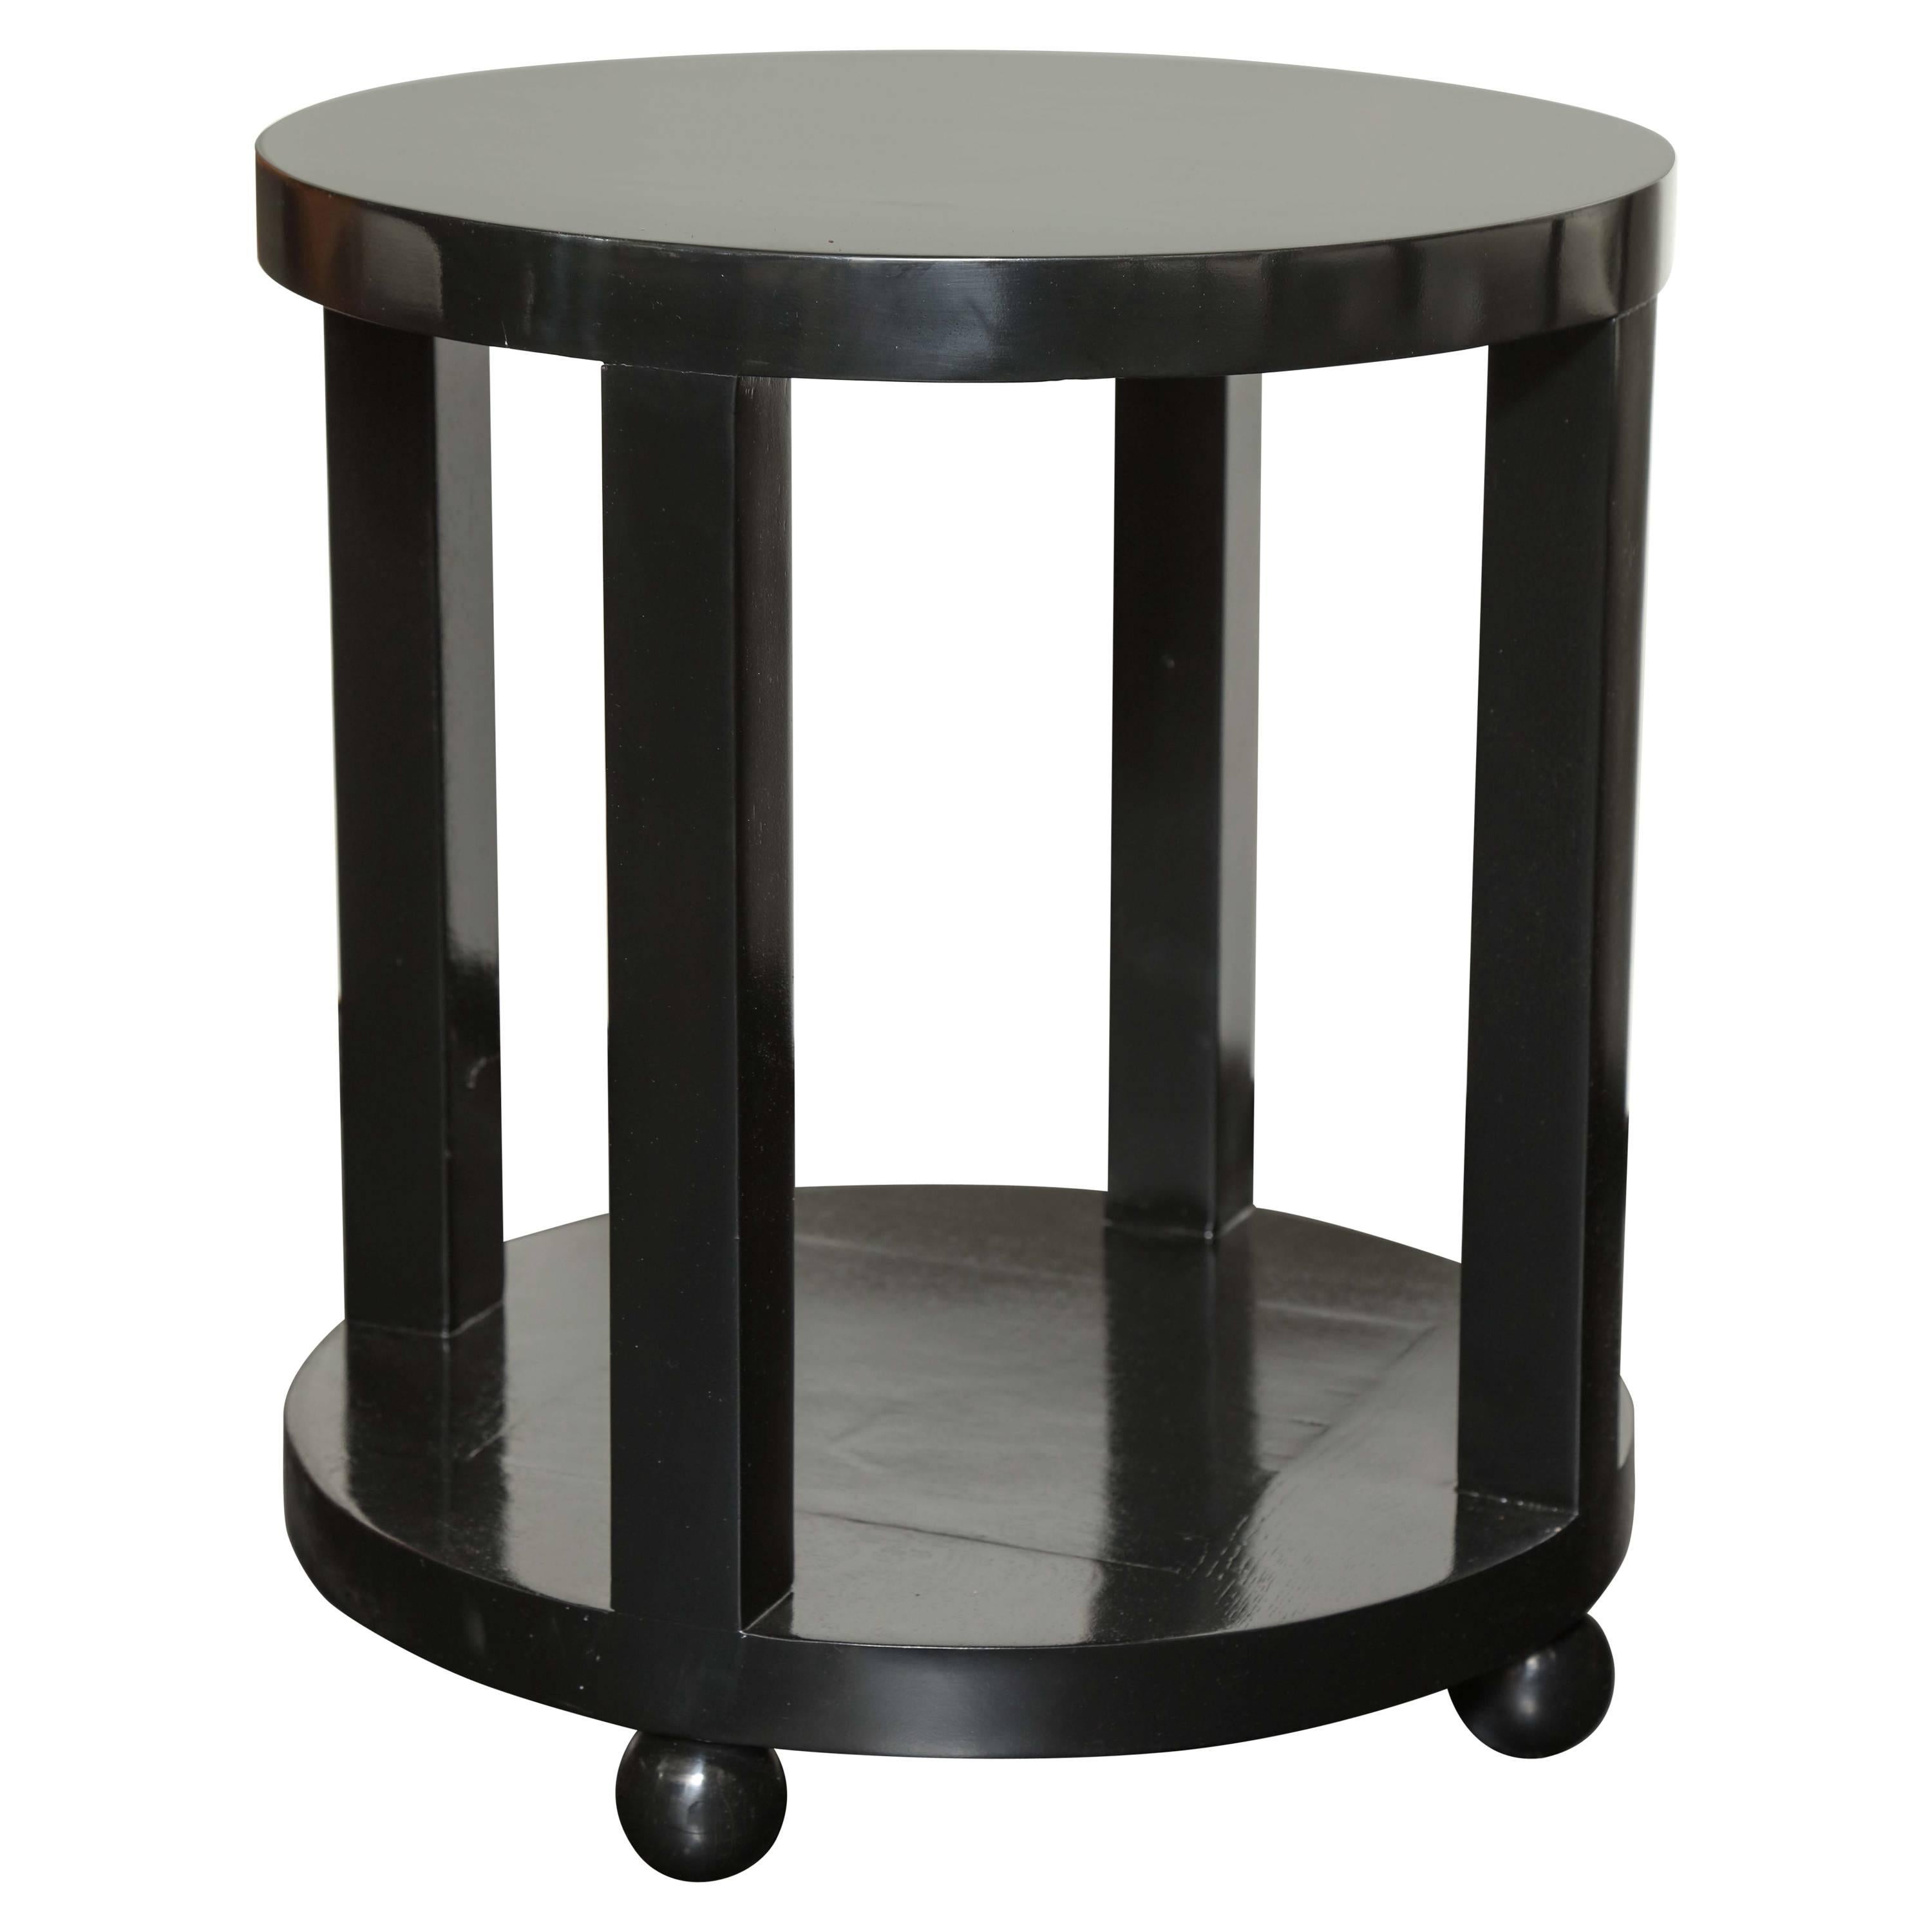 Mid-20th Century Lacquer Table For Sale